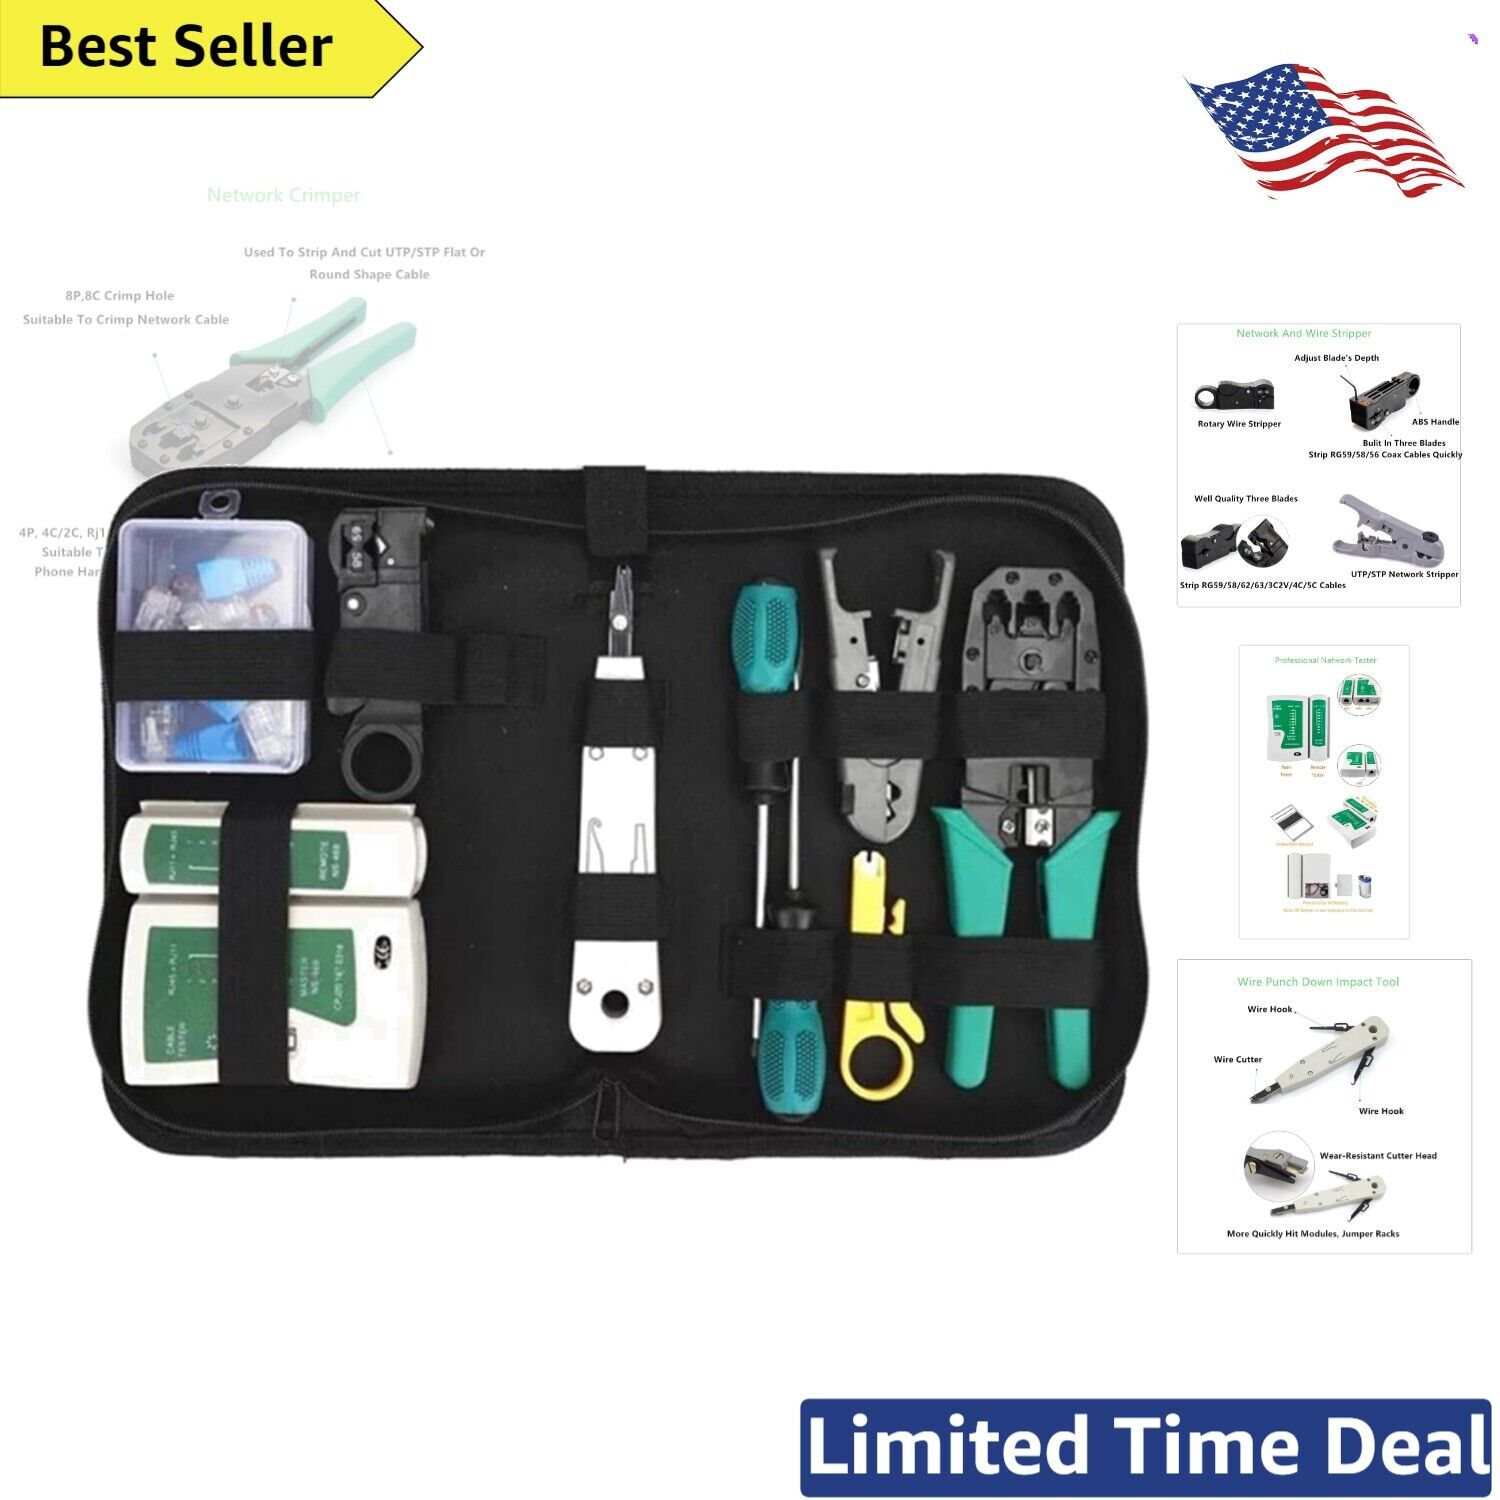 Complete Network Tool Kit - Ethernet Crimping Tool, Cable Tester, Wire Stripper